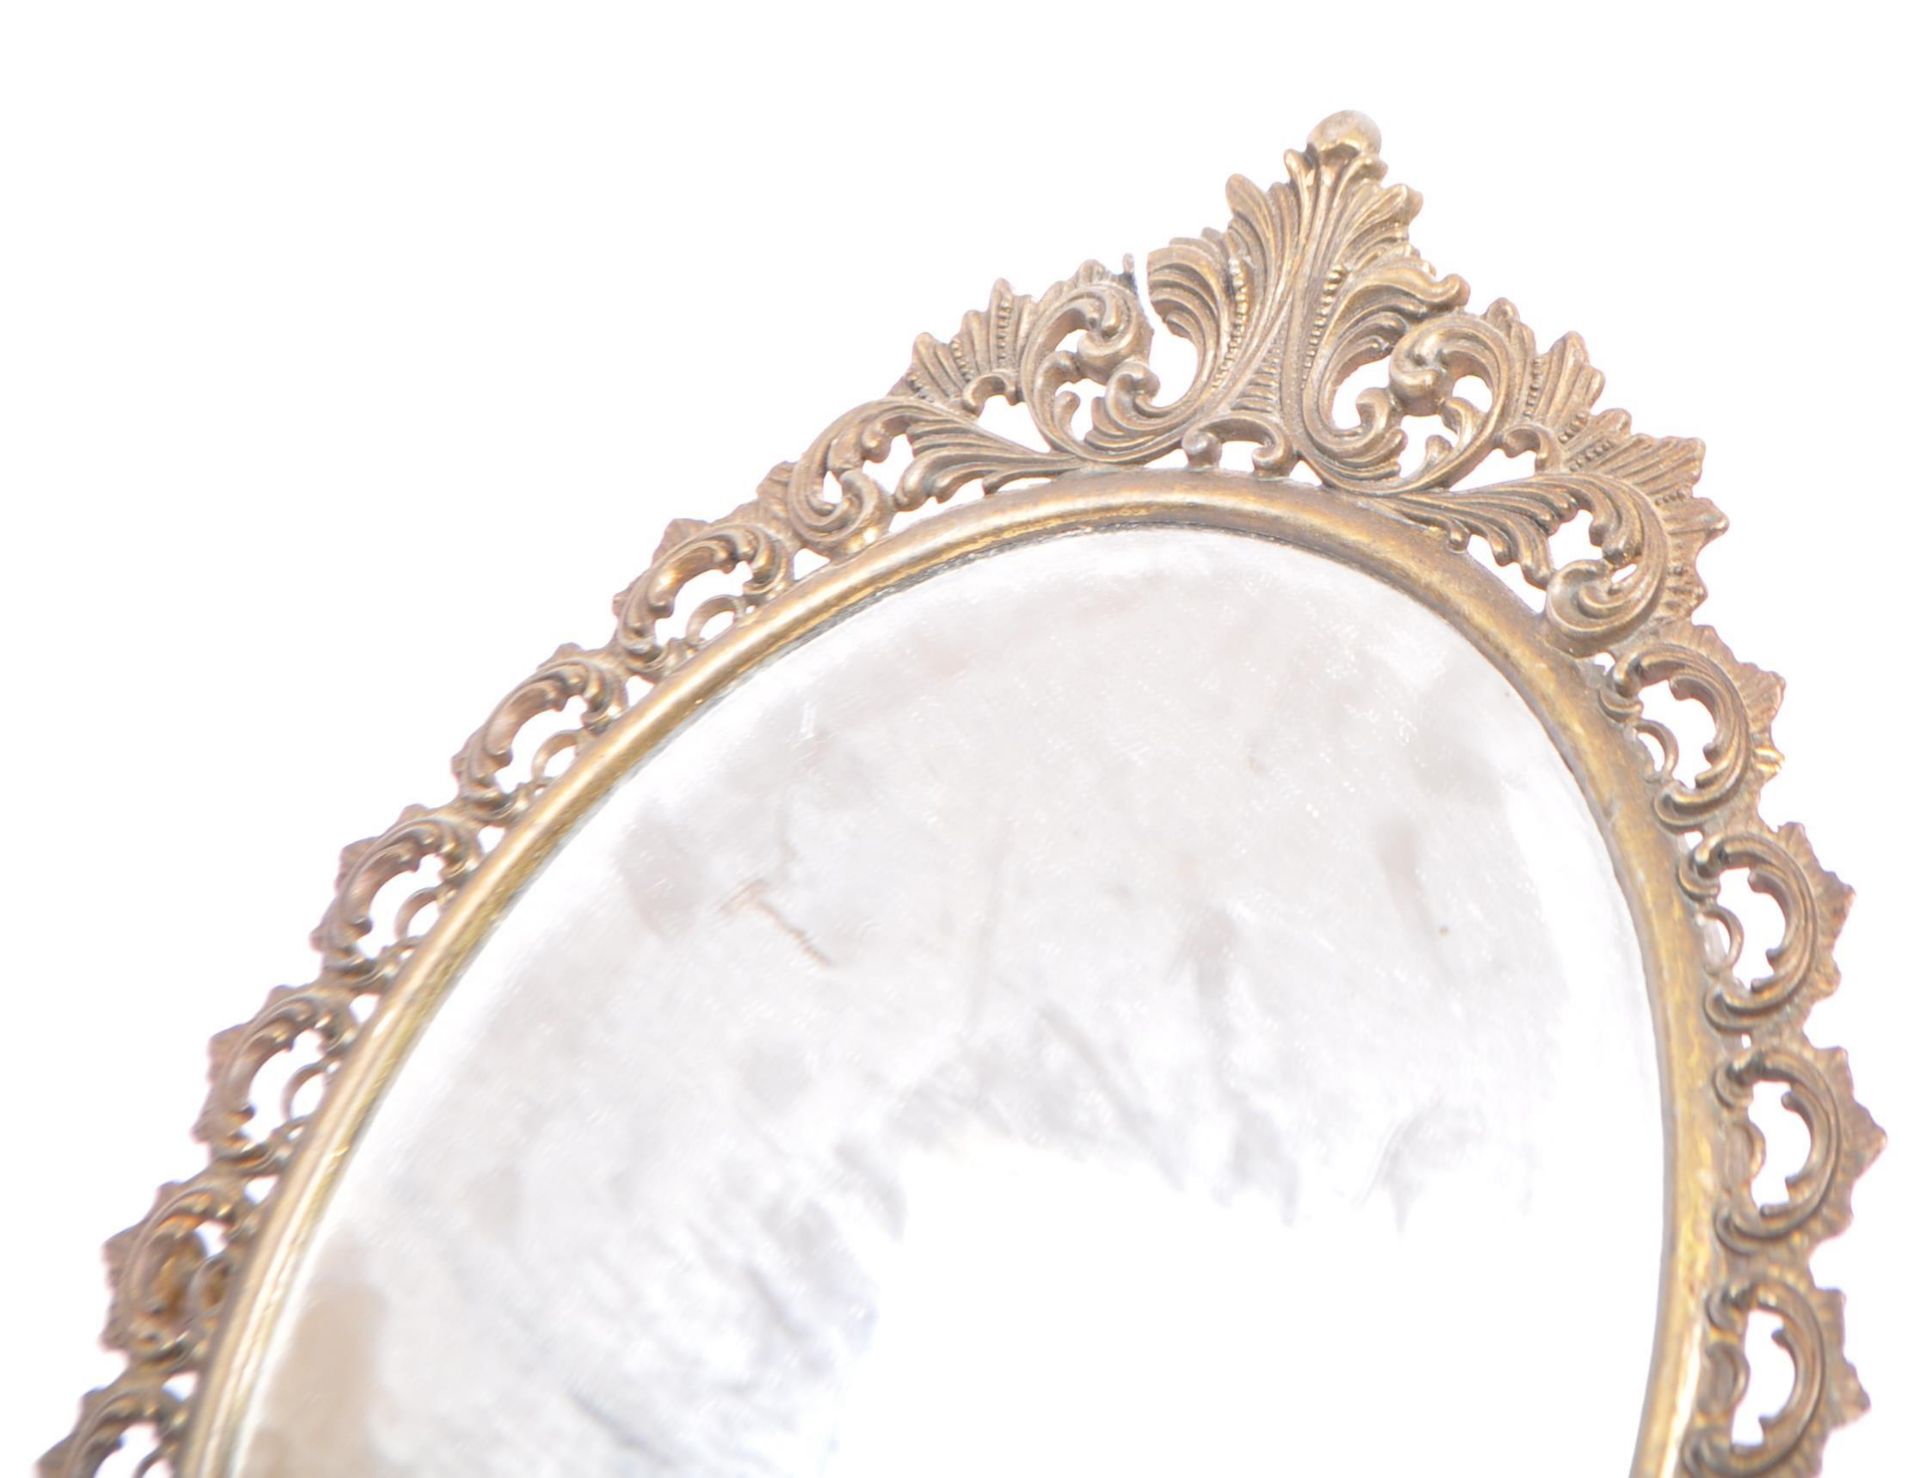 EARLY 20TH CENTURY FRENCH ROCOCO STYLE FREE STANDINGH MIRROR - Image 4 of 5